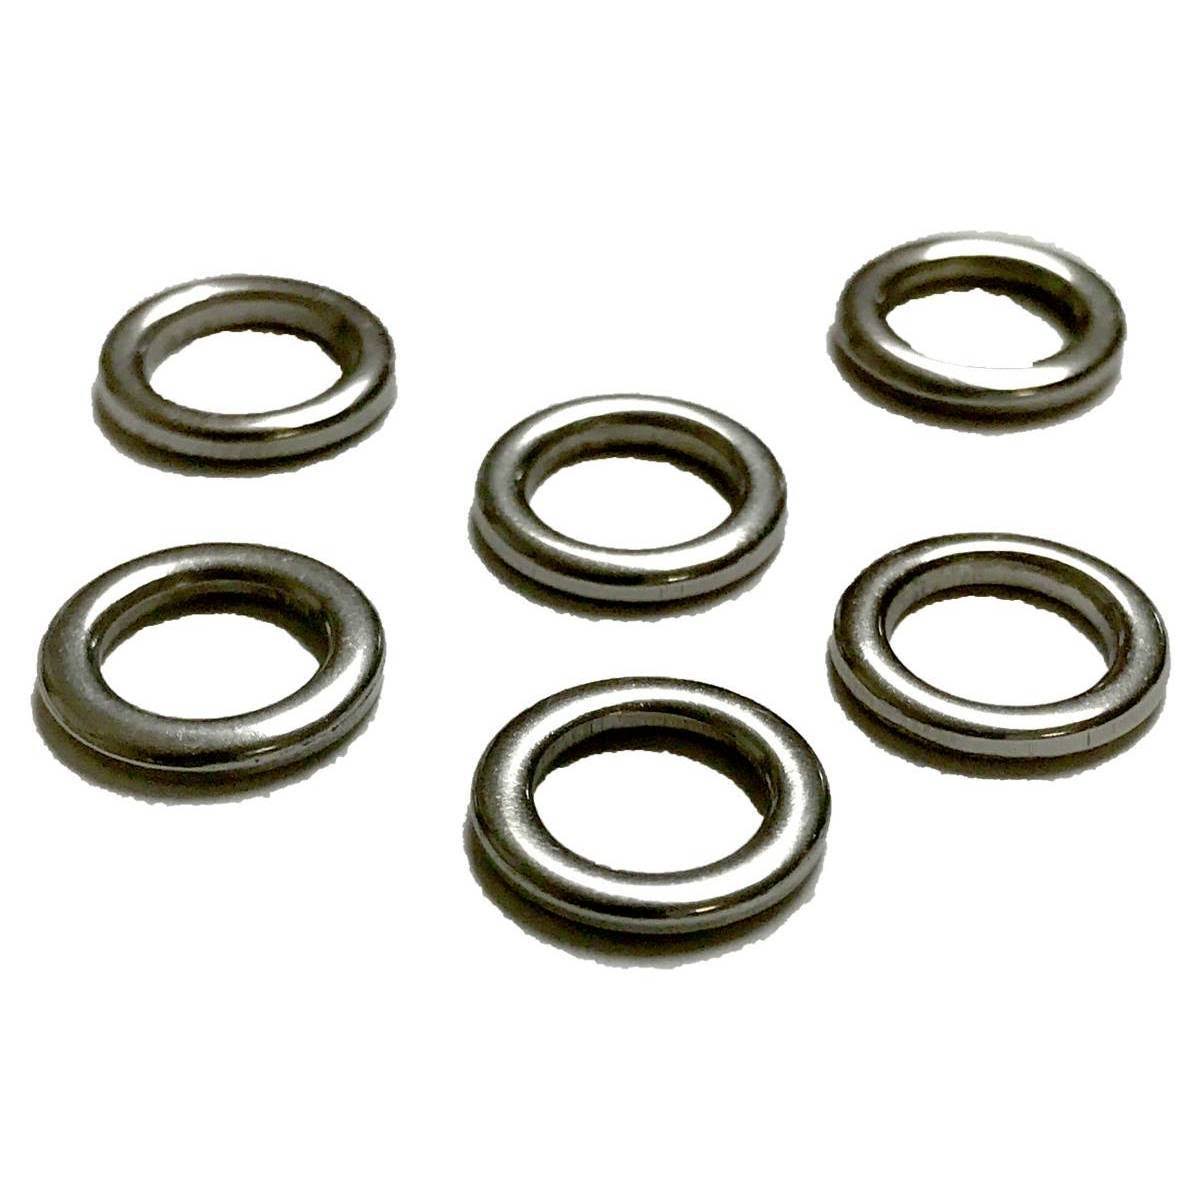 R & R Tackle Kite Fishing Stainless Steel Rings - AfterPay & zipPay Available